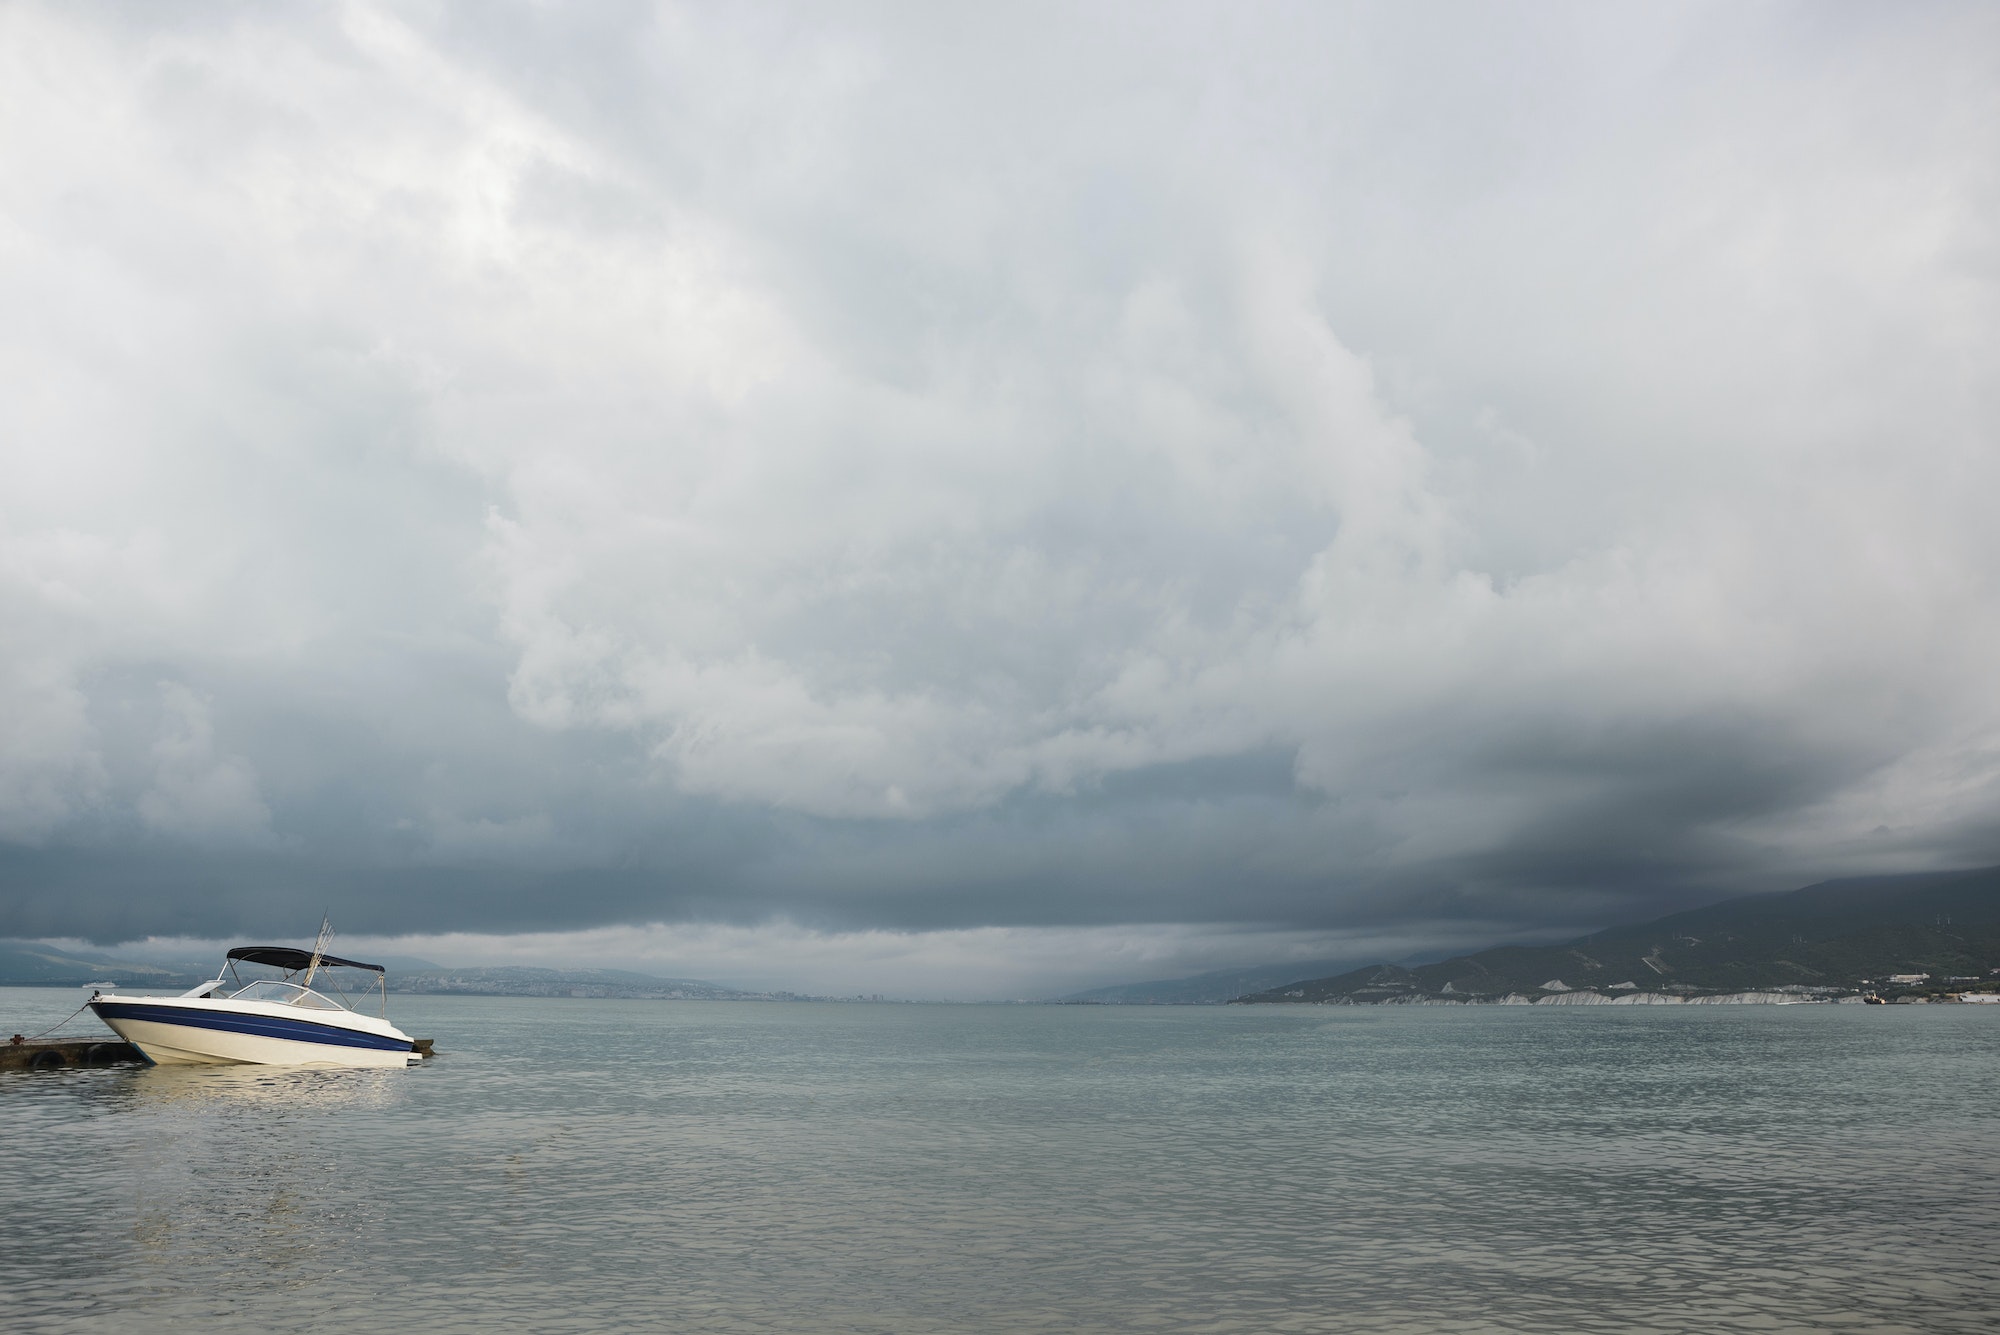 small sport fishing white boat on approaching storm background